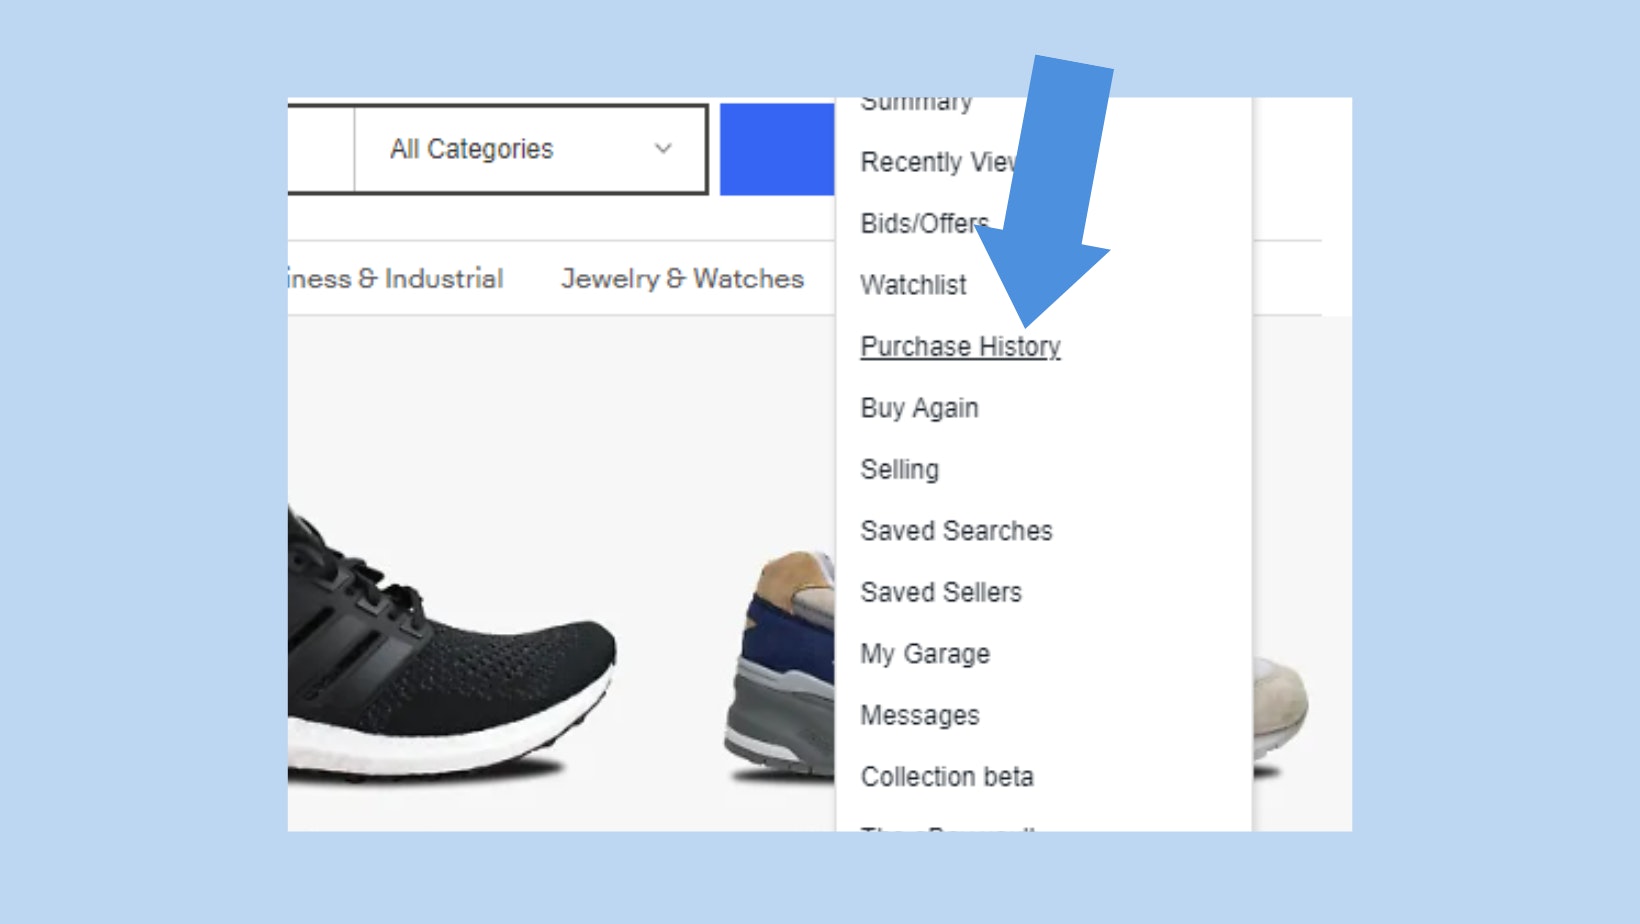 Track your shopping journey with eBay purchase history.